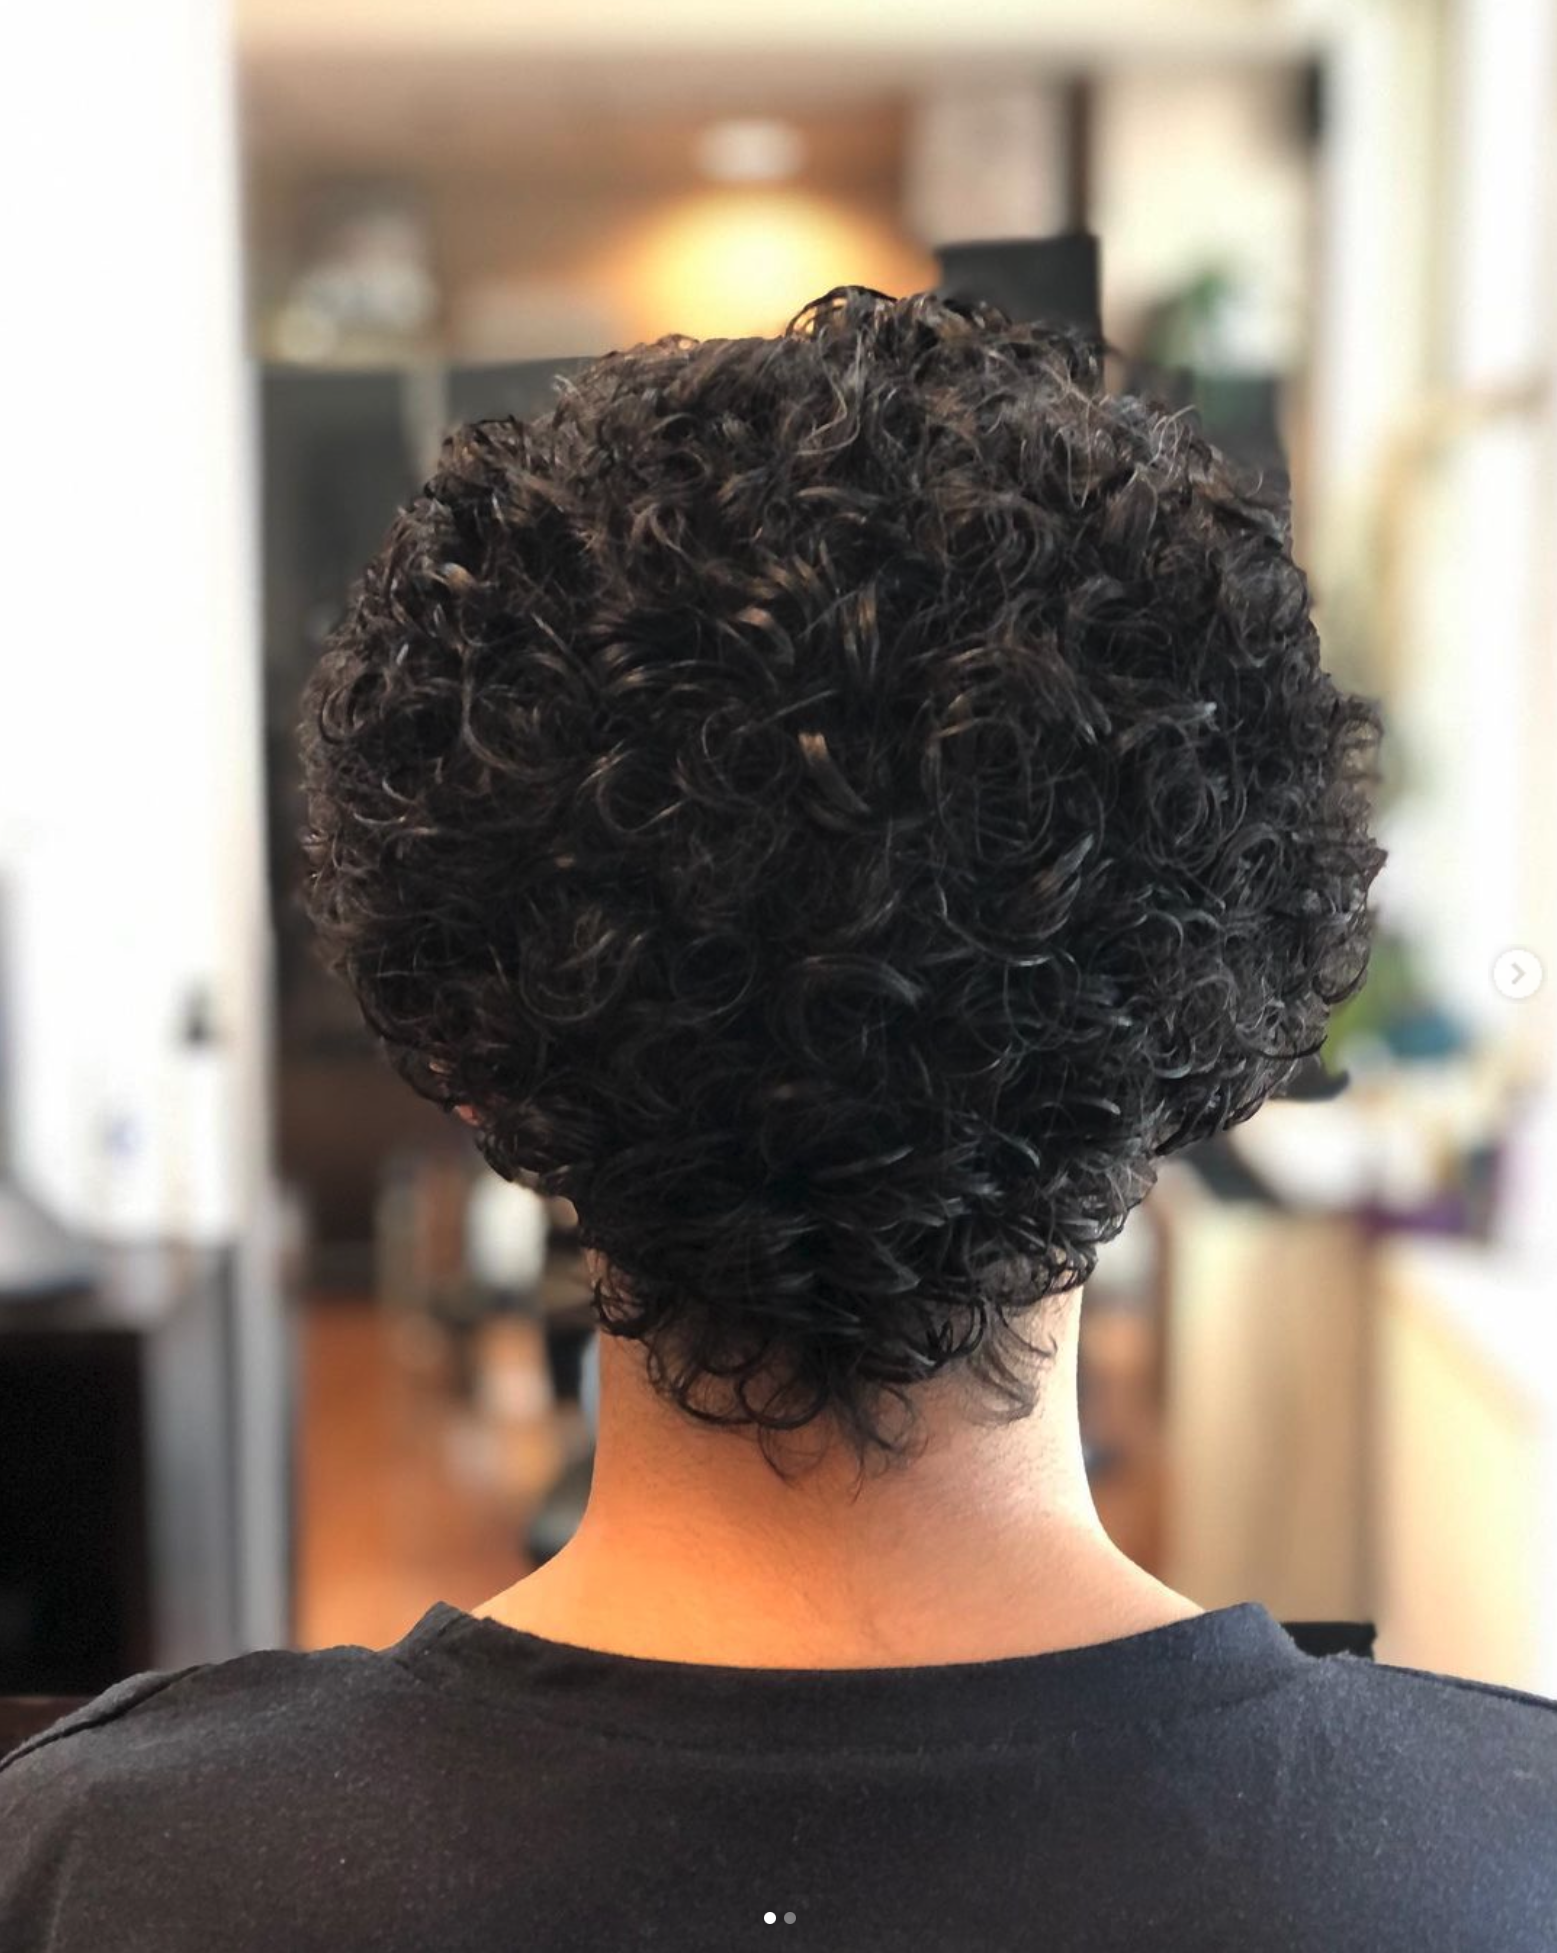 Curly Hair Salon Vancouver